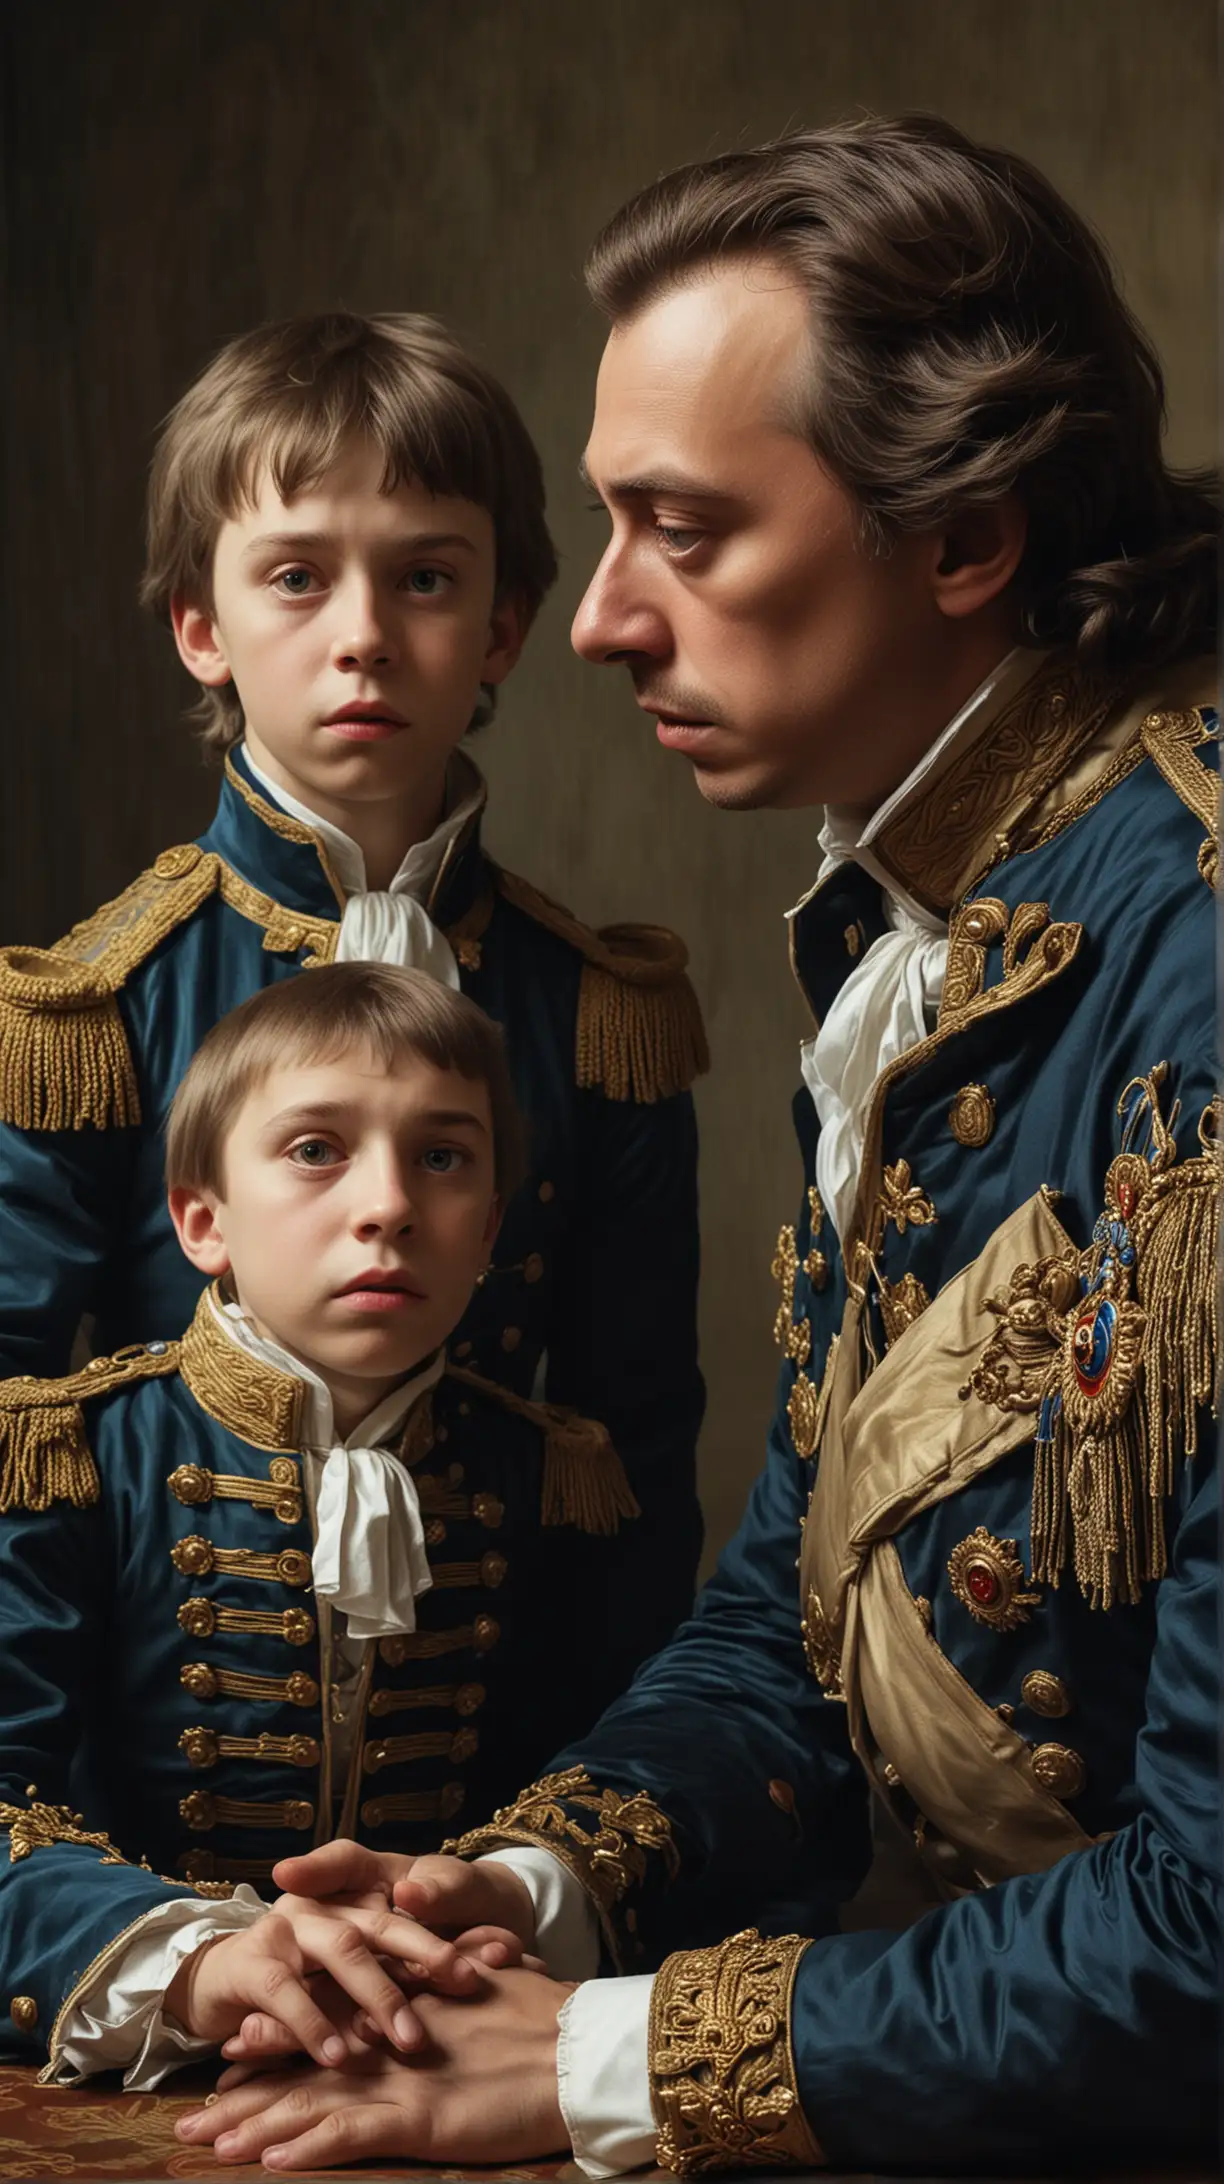 Peter the Great and Alexei Tense FatherSon Moment